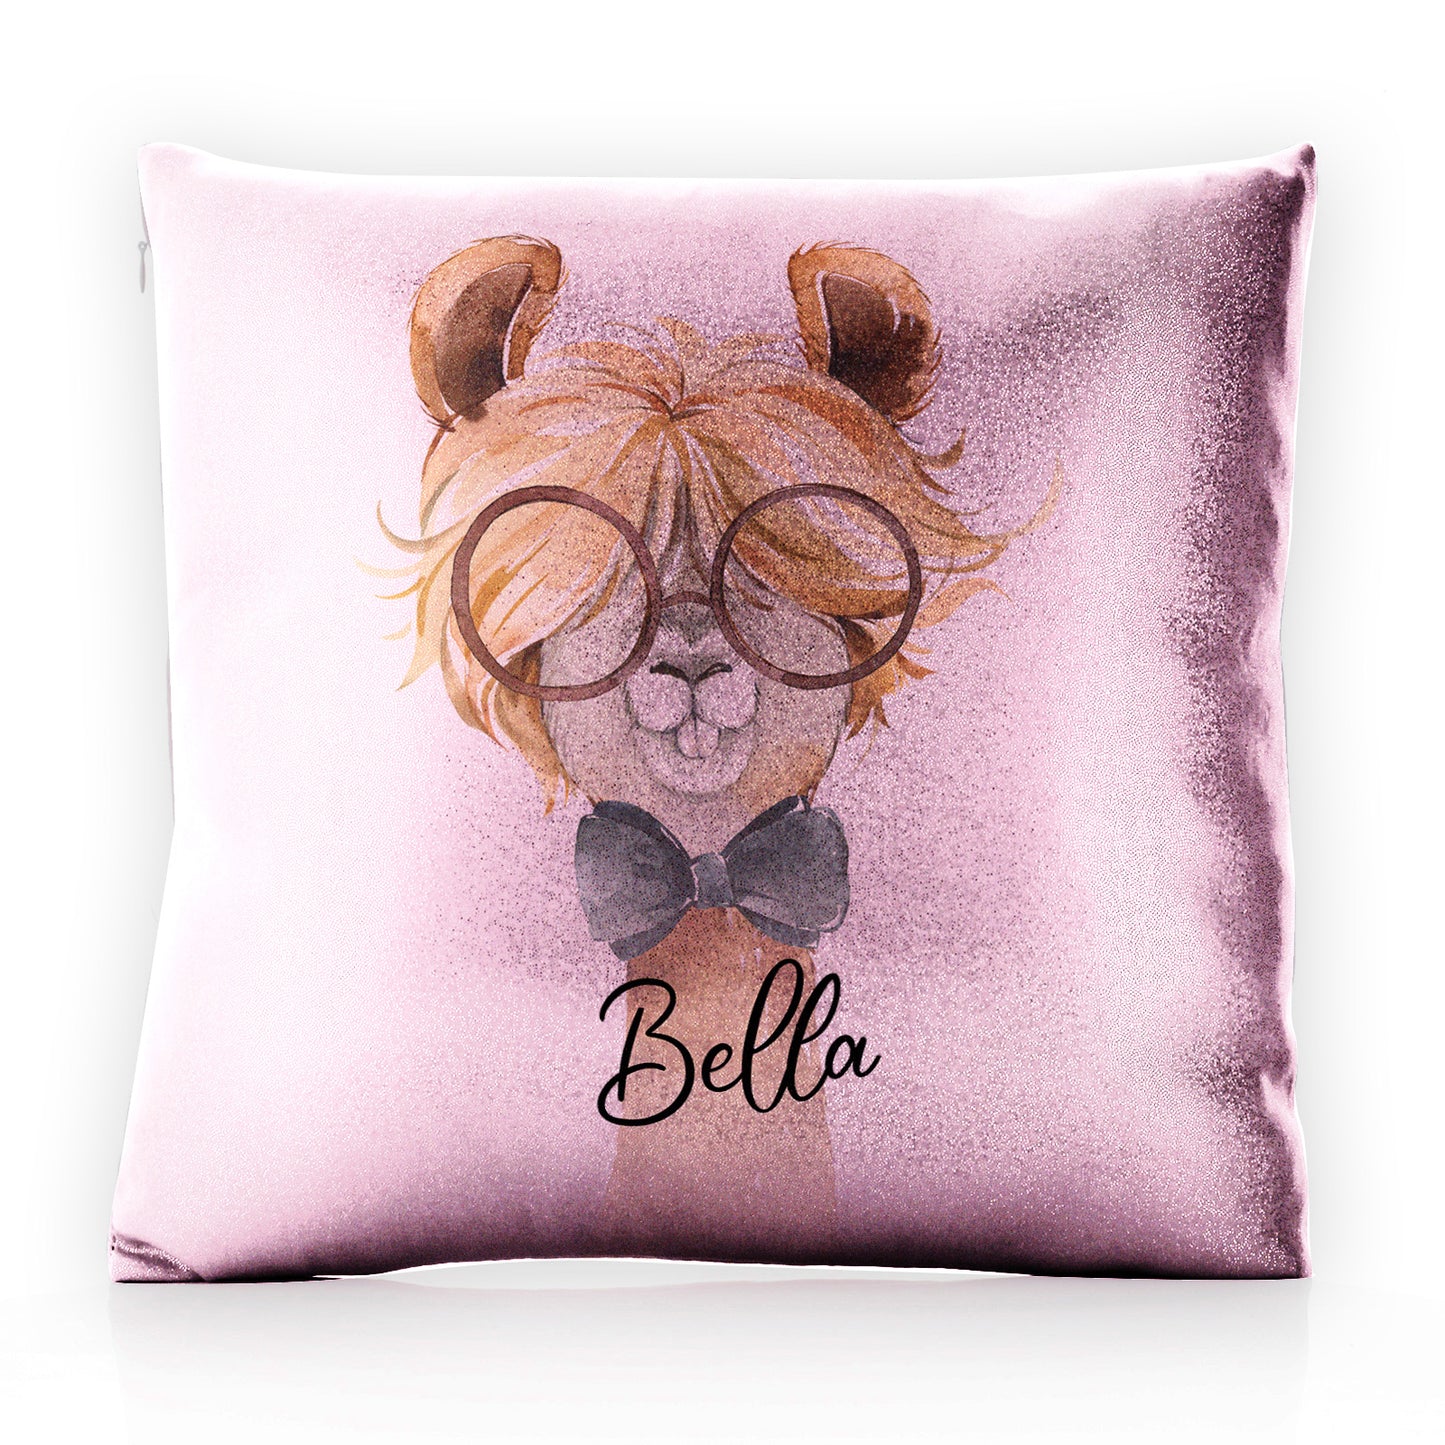 Personalised Glitter Cushion with Alpaca Bow Tie and Glasses and Cute Text